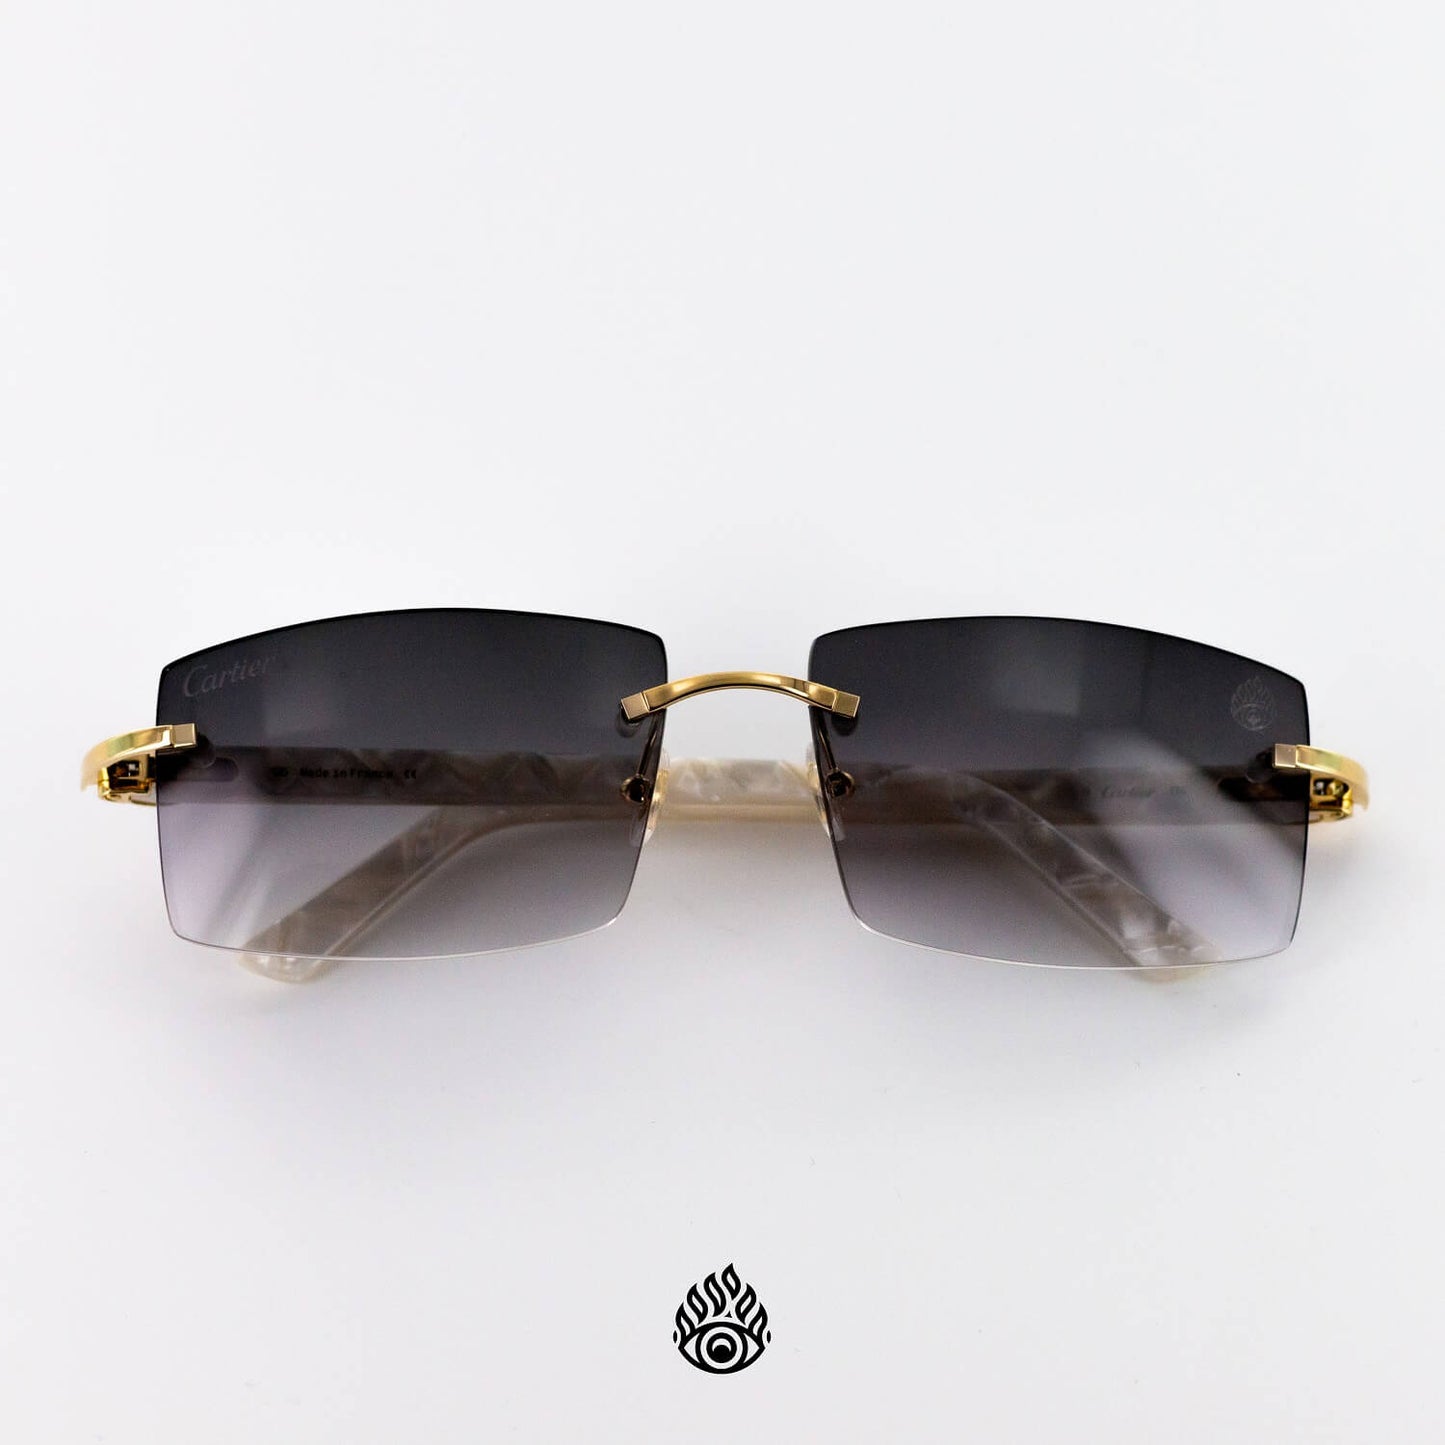 Cartier White Acetate Glasses with Gold C Decor & Grey Lens